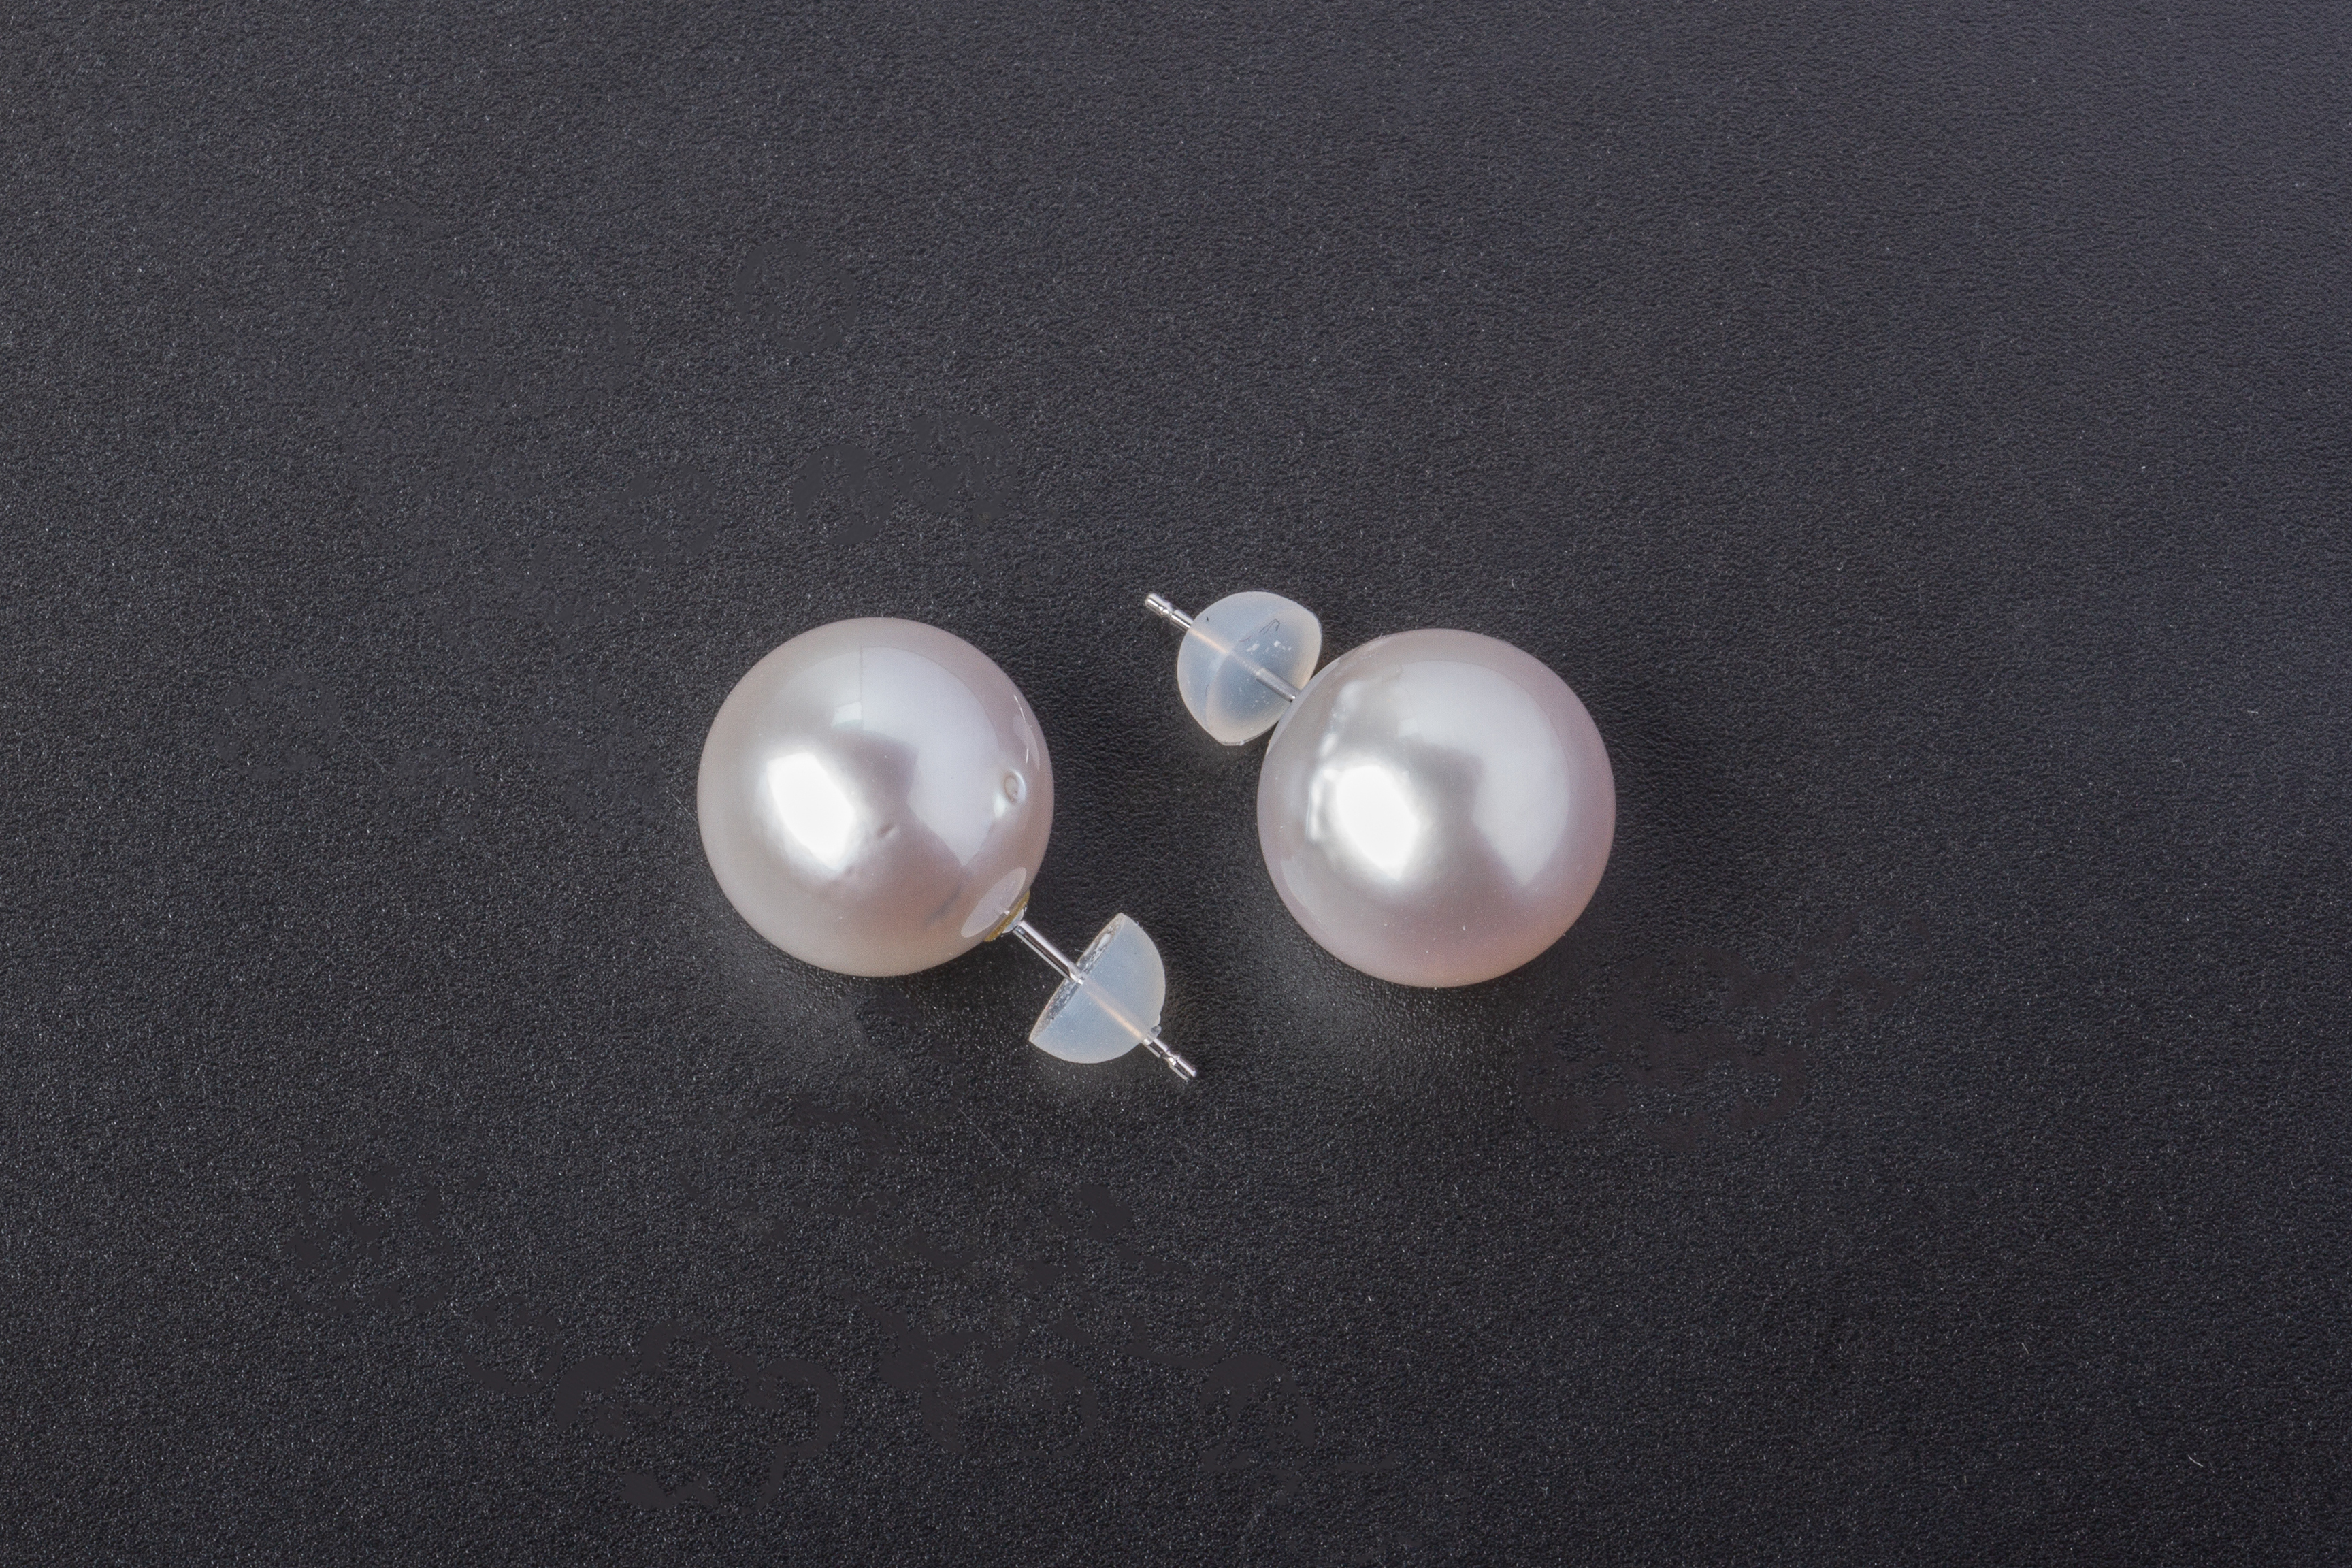 A PAIR OF CULTURED PEARL EARRINGS - Image 3 of 3